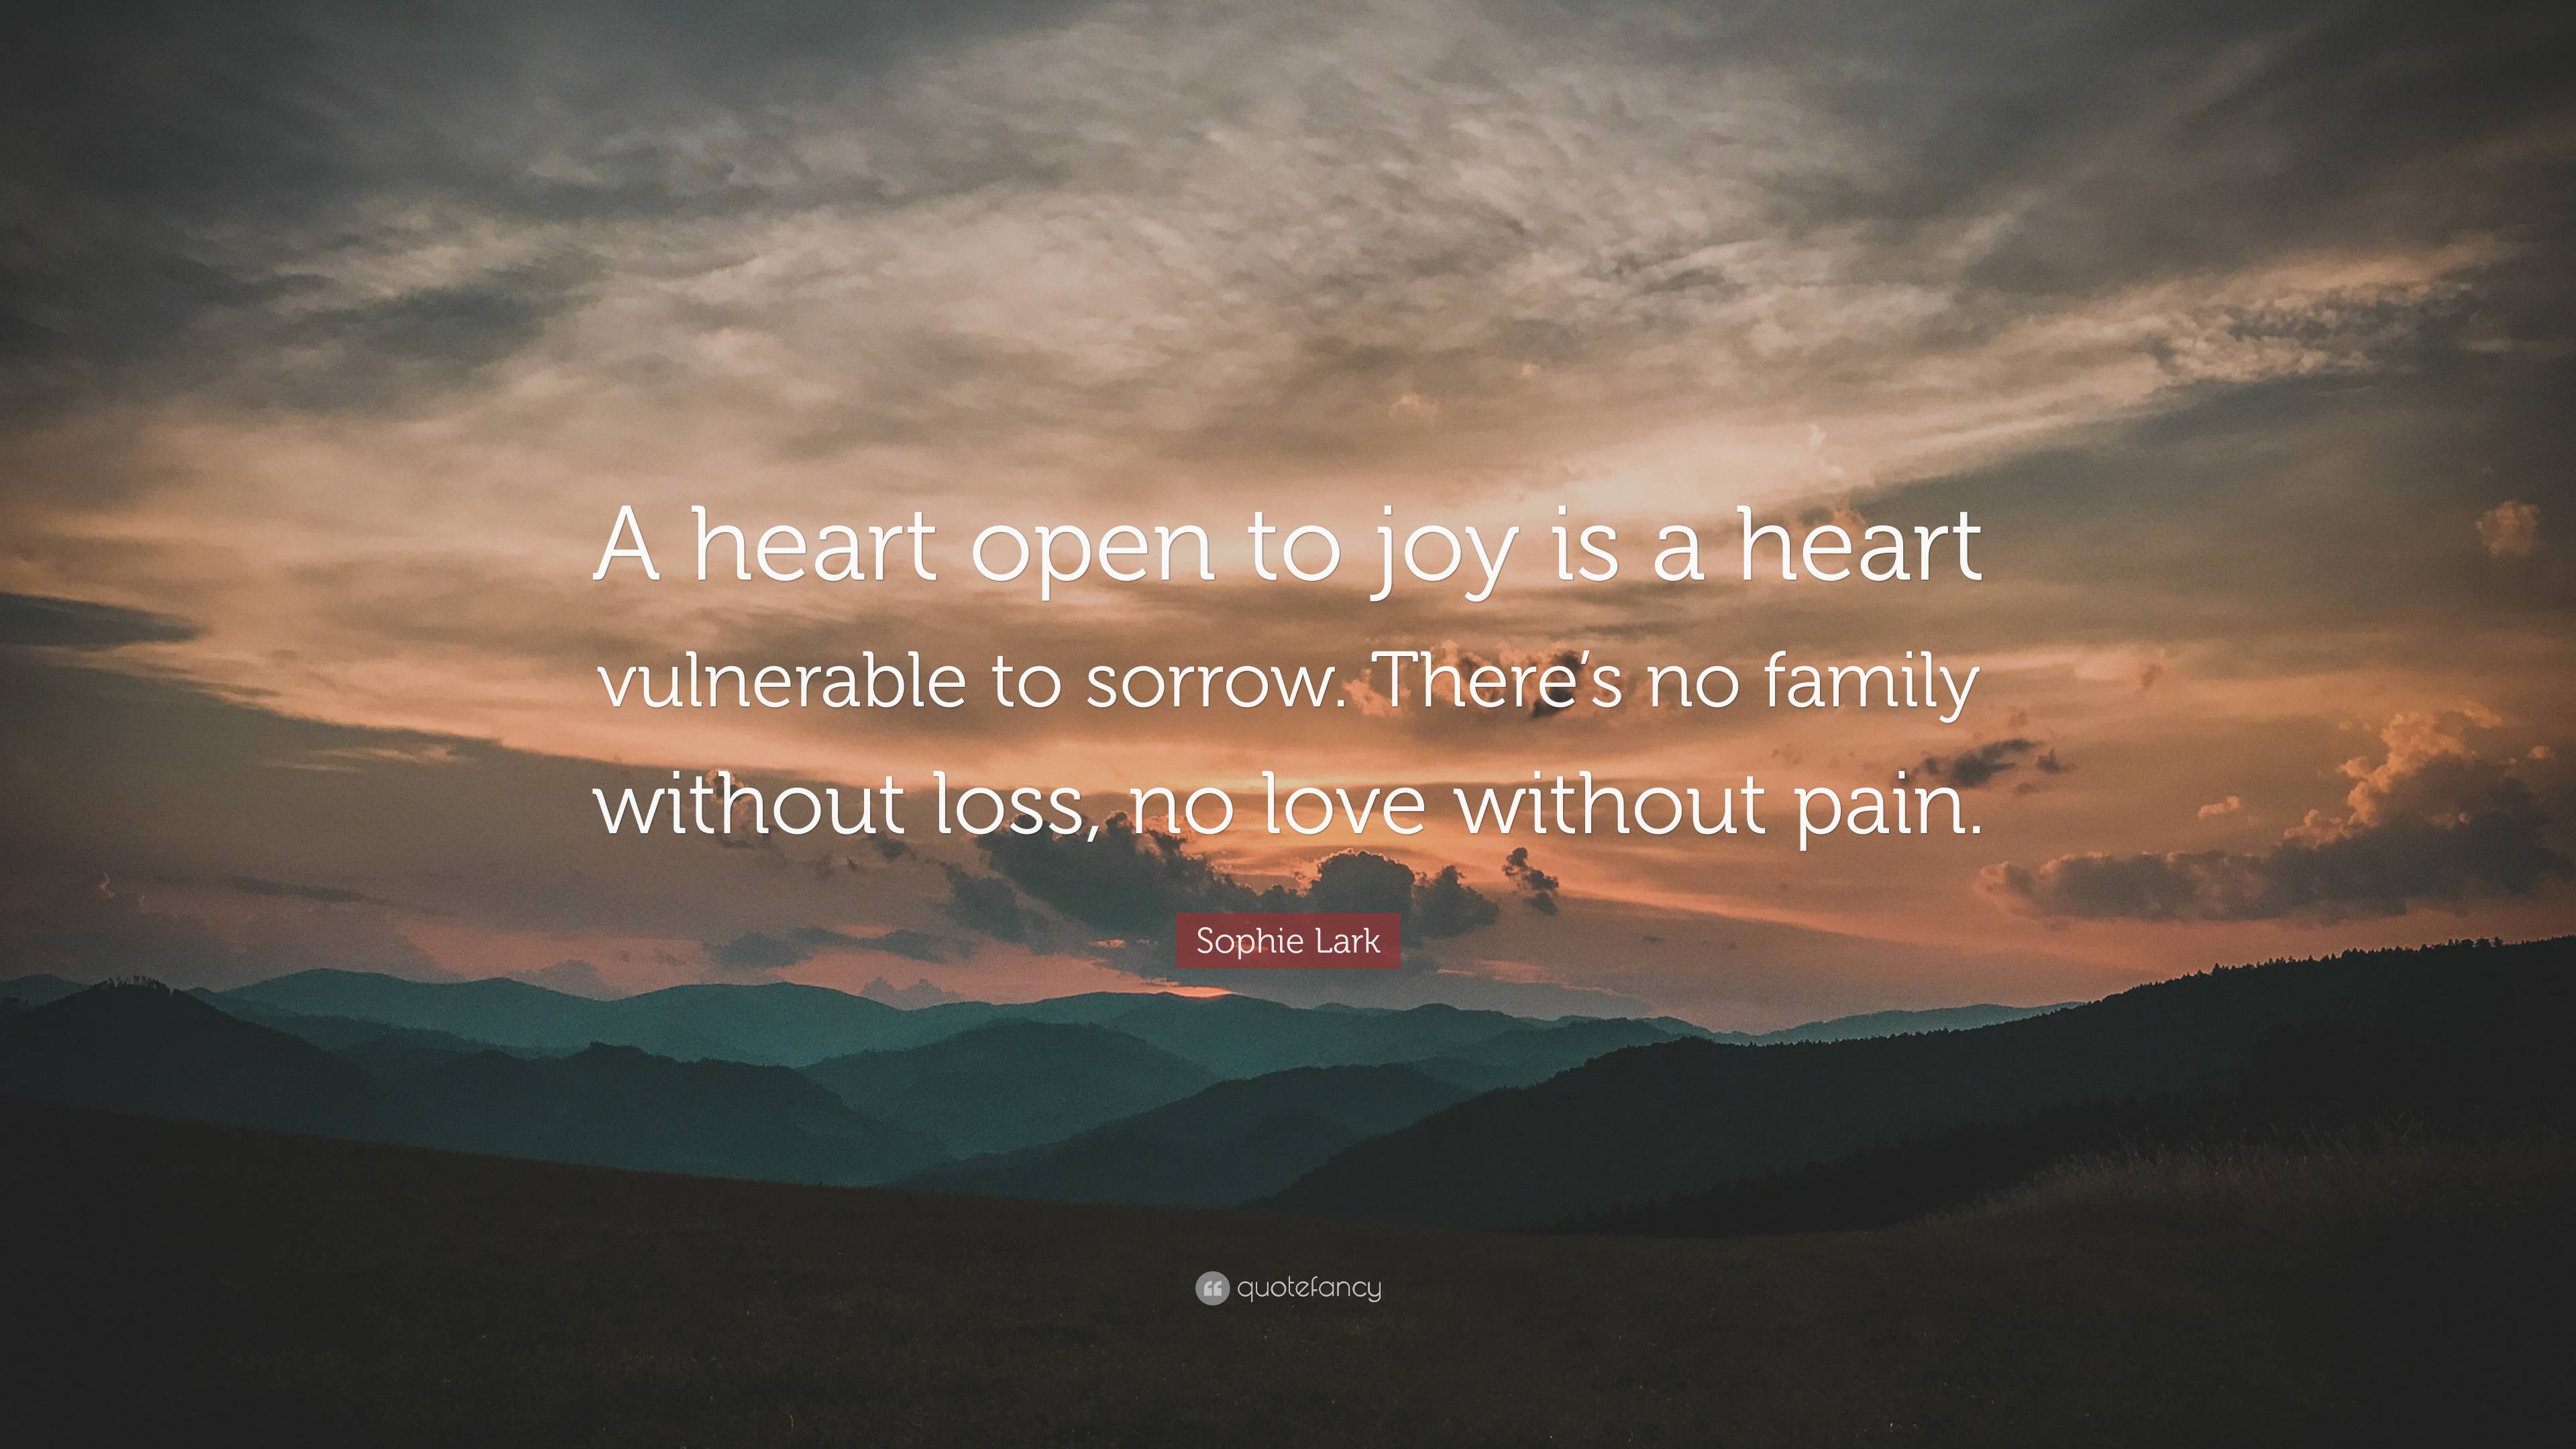 Sophie Lark Quote: “A heart open to joy is a heart vulnerable to sorrow ...